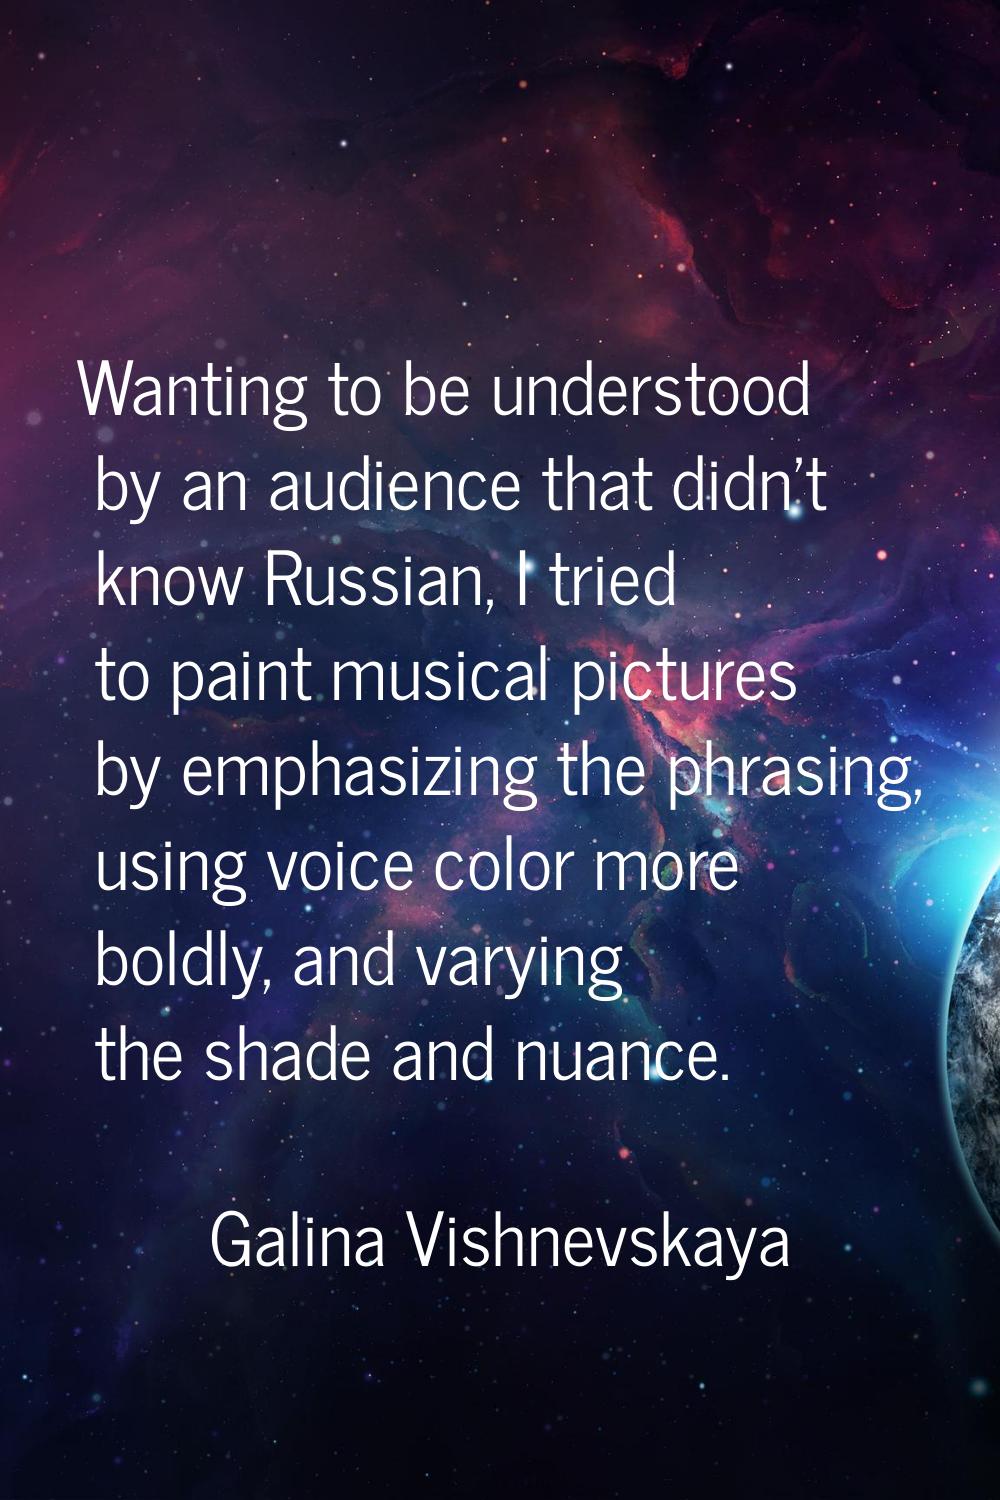 Wanting to be understood by an audience that didn't know Russian, I tried to paint musical pictures